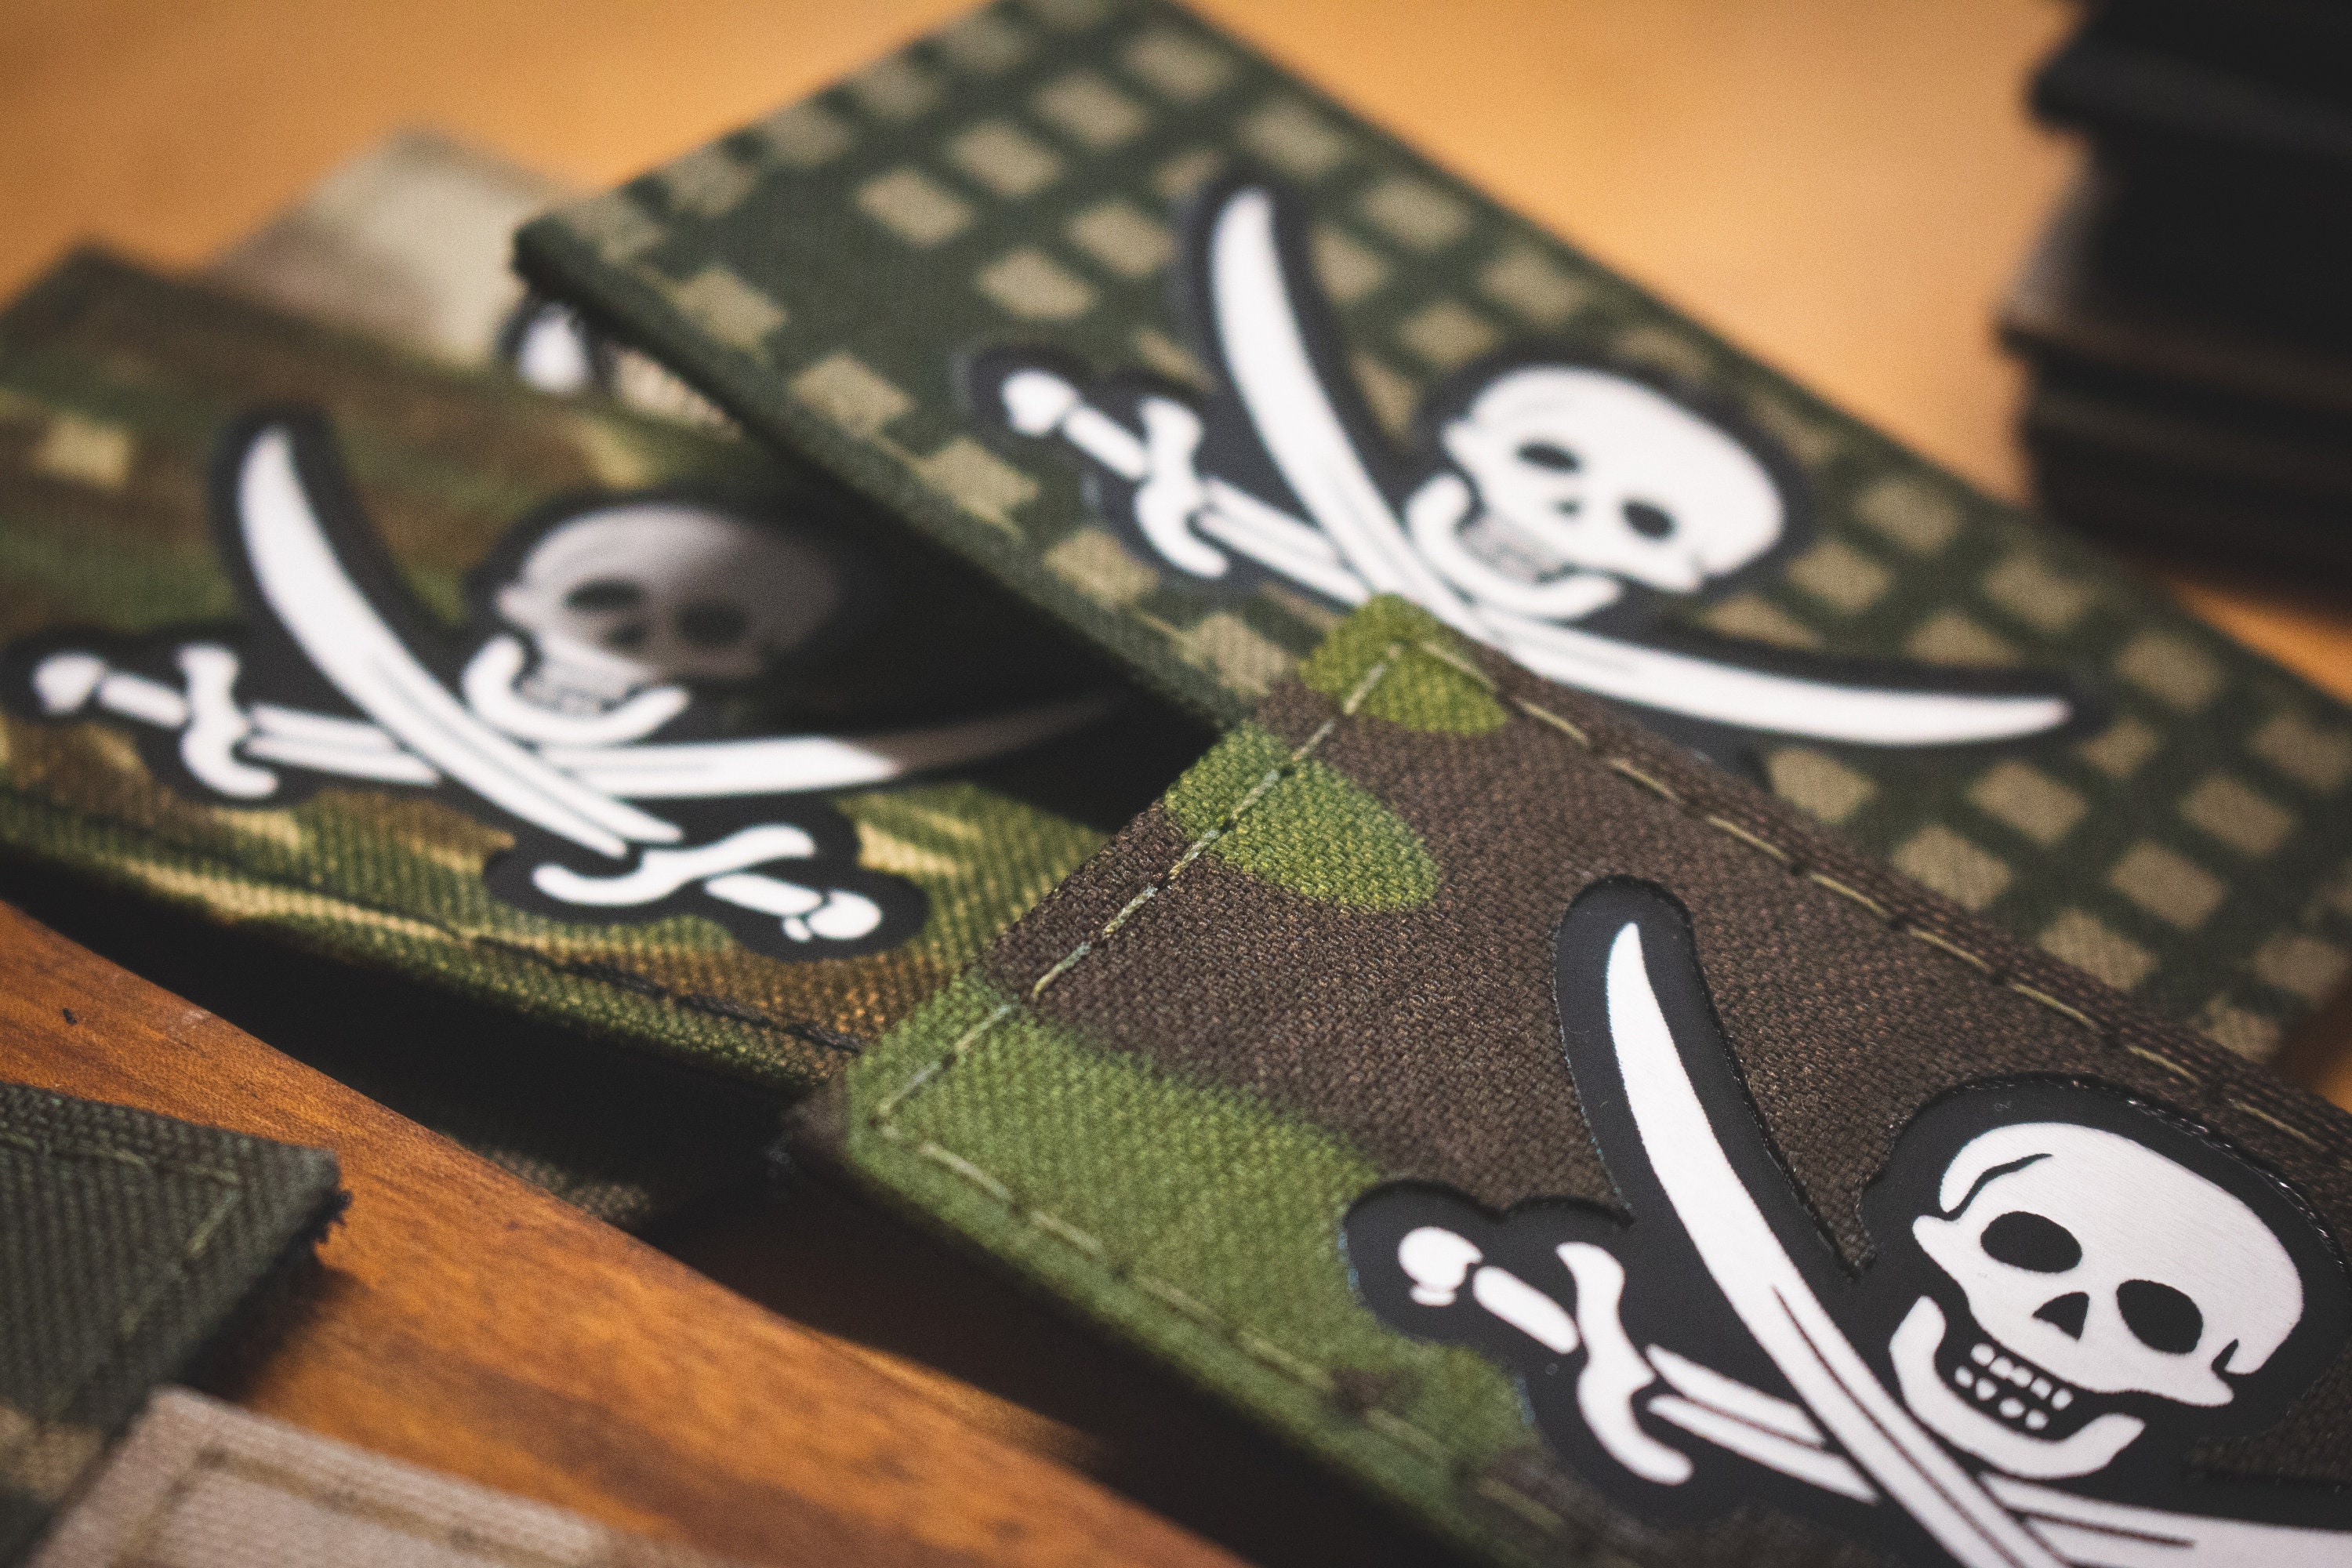 Boutique DIY┅ Hot Sale Pirate Flag Embroidered Hook Loop Patches Tactical  BADGE PATCH Skull Clothing Cloth Patch Stickers